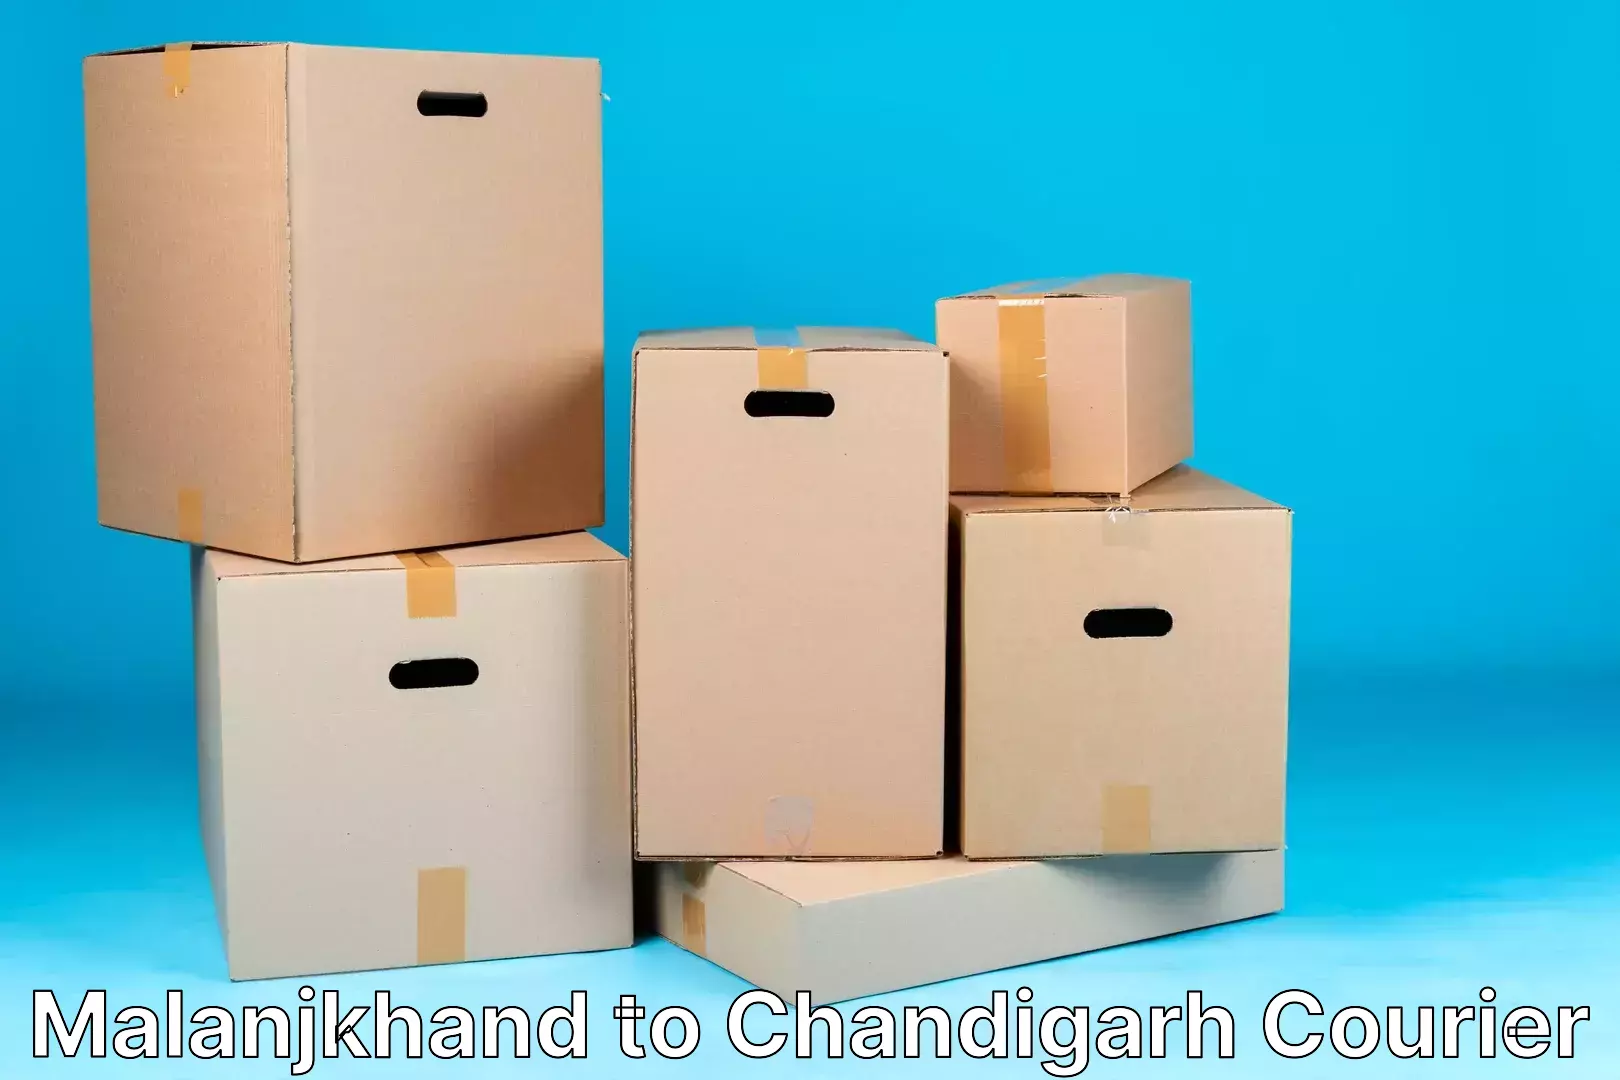 Integrated shipping systems Malanjkhand to Chandigarh